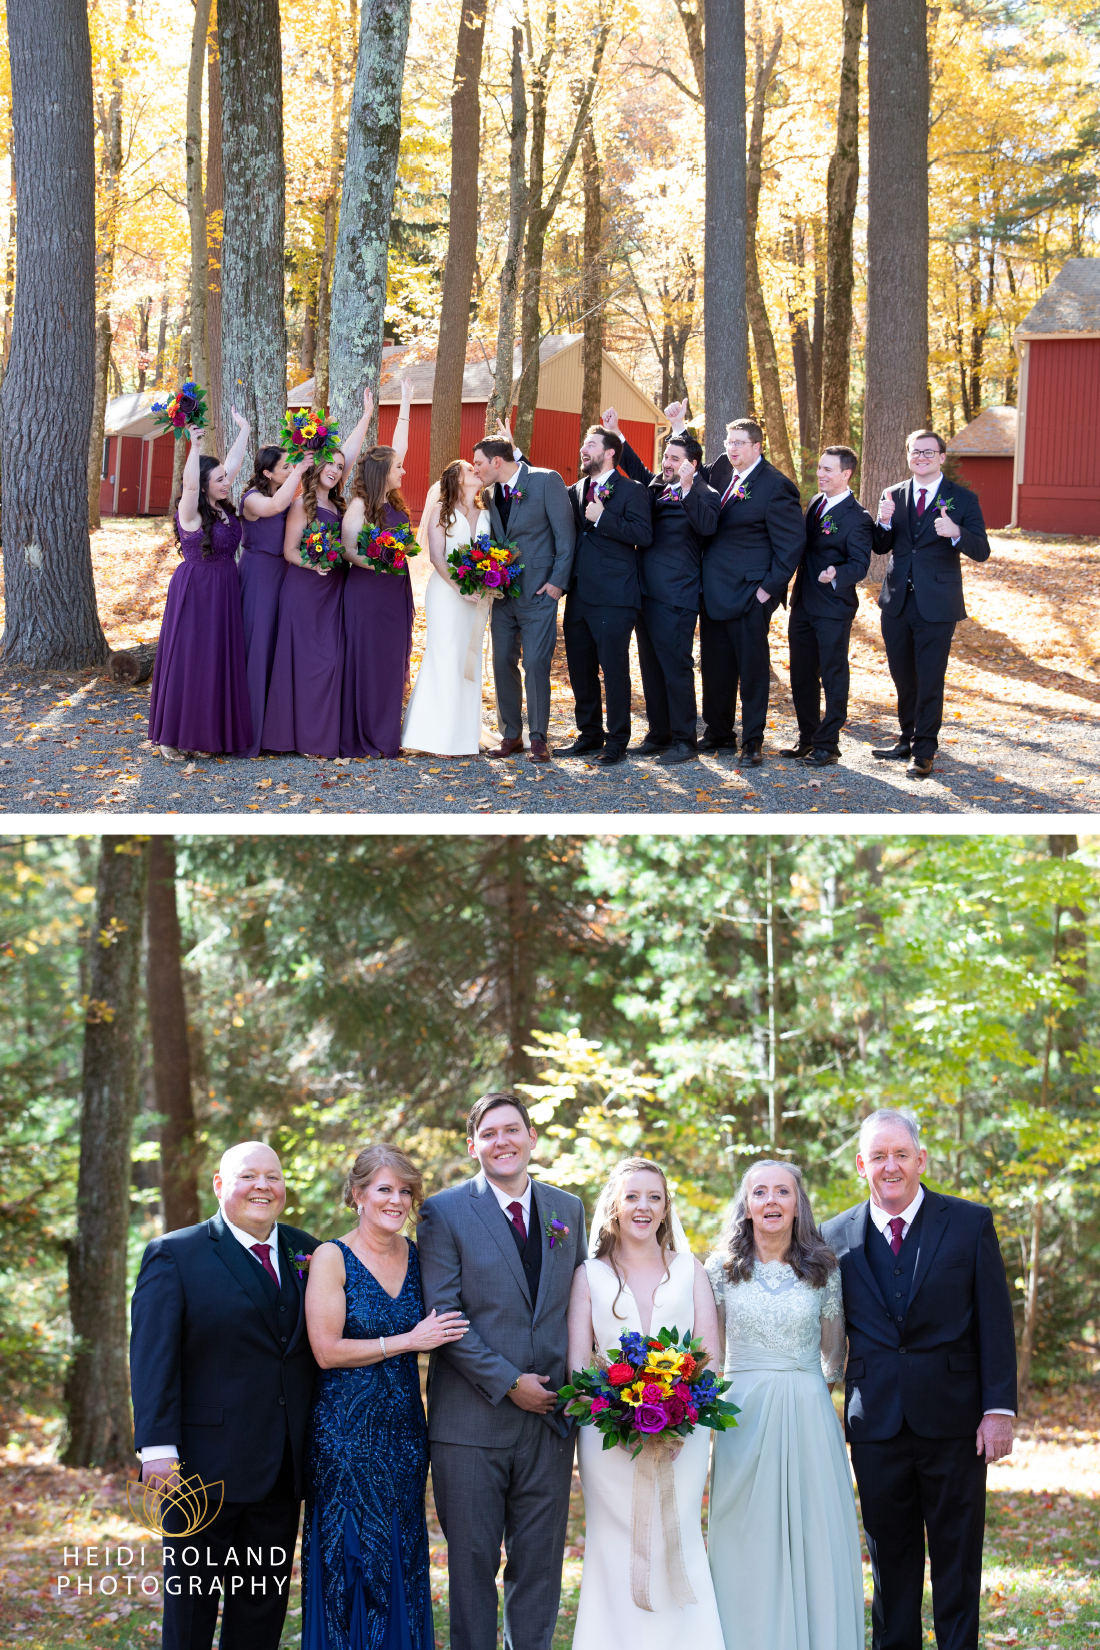 Bride and groom with their loved ones at fall wedding in Mt Pocono PA